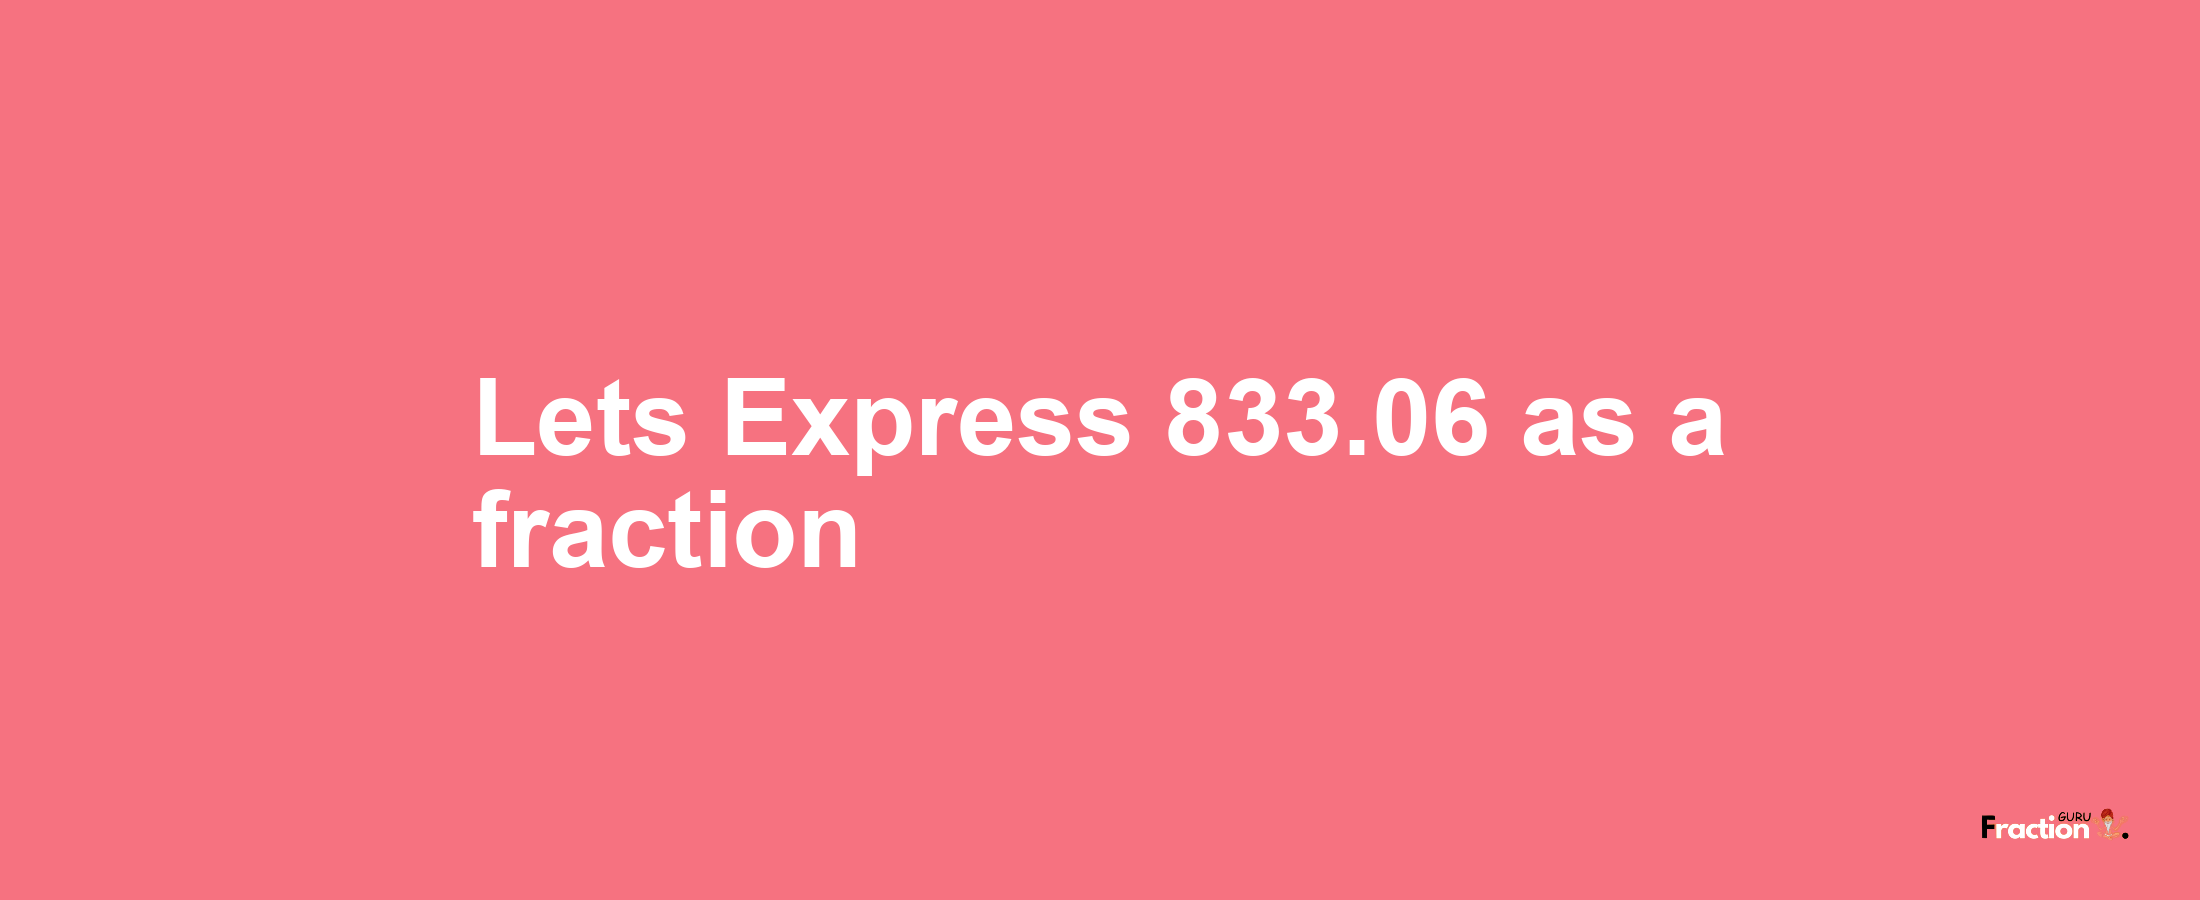 Lets Express 833.06 as afraction